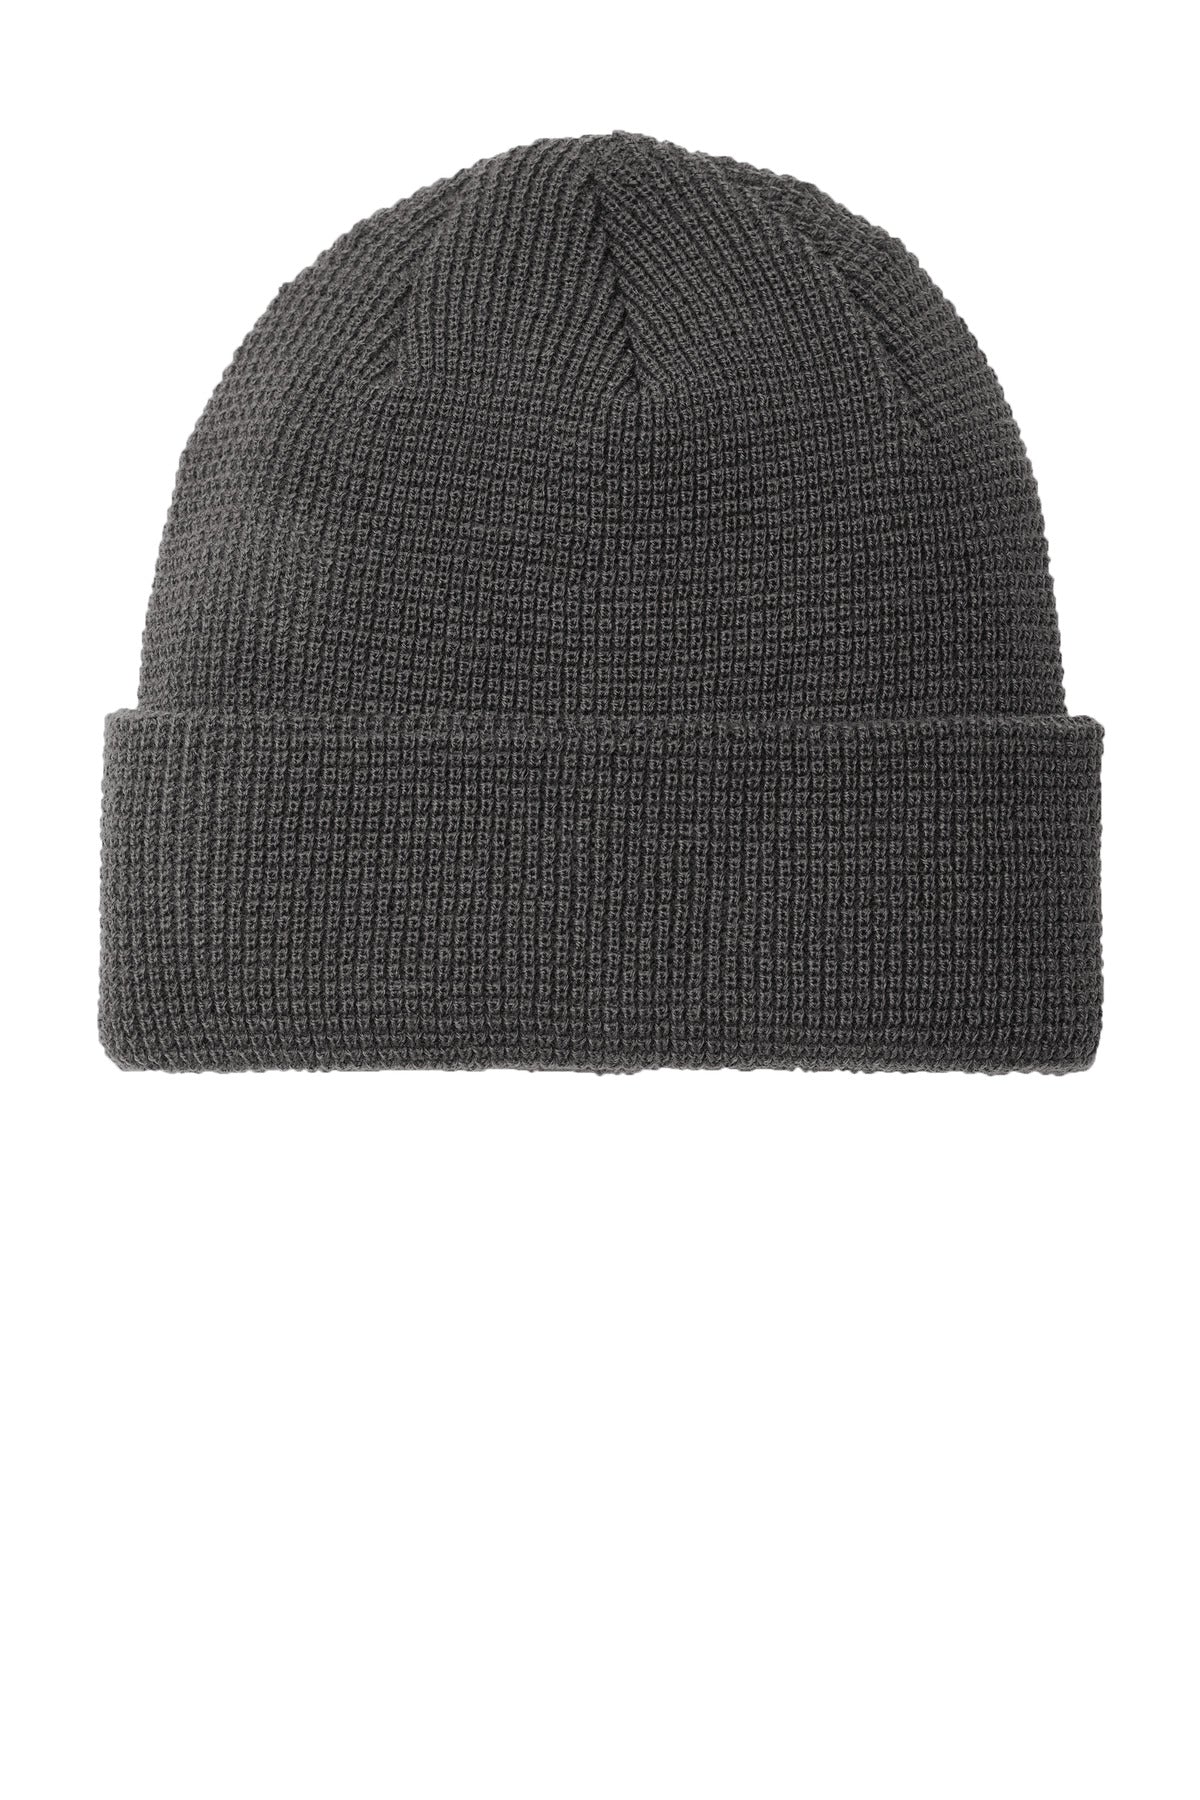 Port Authority Thermal Knit Cuffed Beanie C955